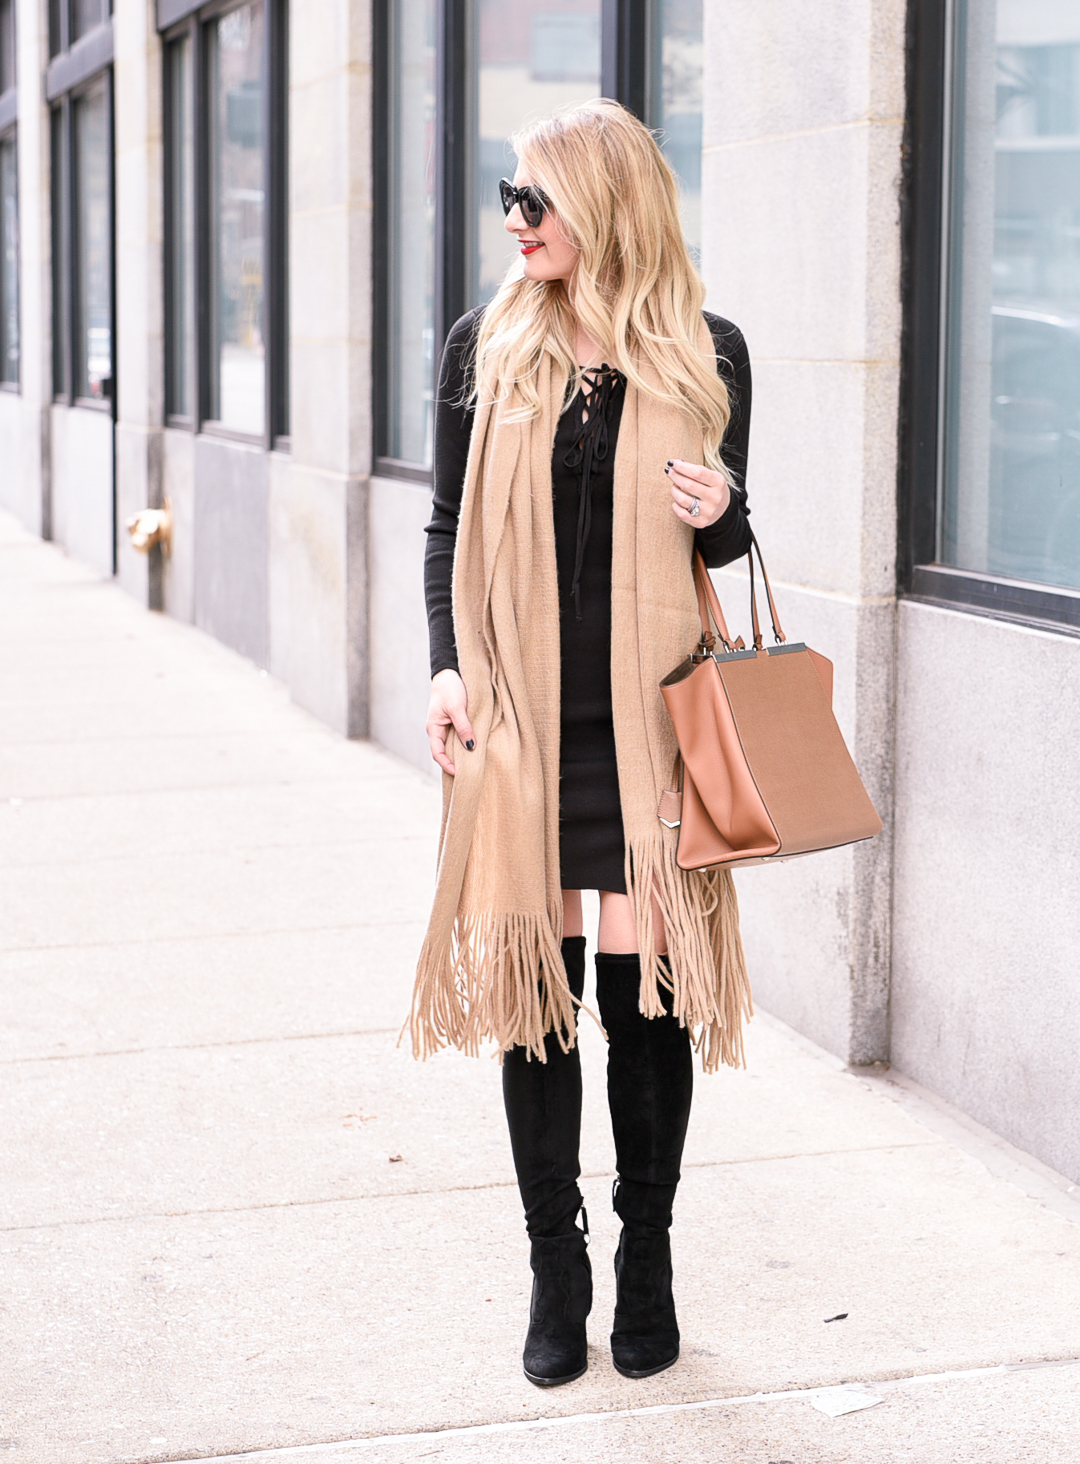 Jenna Colgrove wearing a Free People fringe scarf and a black bodycon dress.